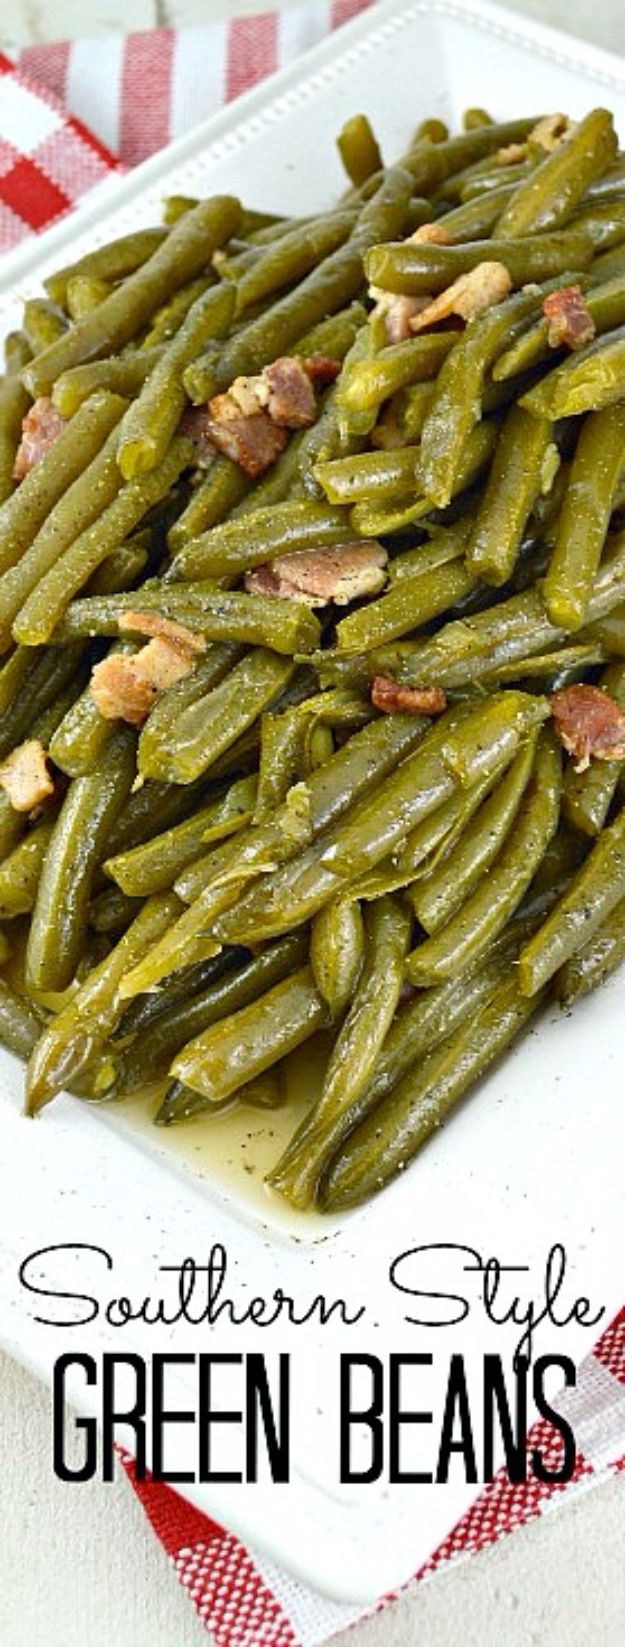 Easy Country Cooking Vegetable Recipes - Southern Style Green Beans - Easy Recipes for Country Food Like Chicken Fried Steak, Fried Green Tomatoes, Southern Gravy, Breads and Biscuits, Casseroles and More - Breakfast, Lunch and Dinner Recipe Ideas for Families and Feeding A Crowd - Step by Step Instructions for Making Homestyle Dips, Snacks, Desserts #recipes